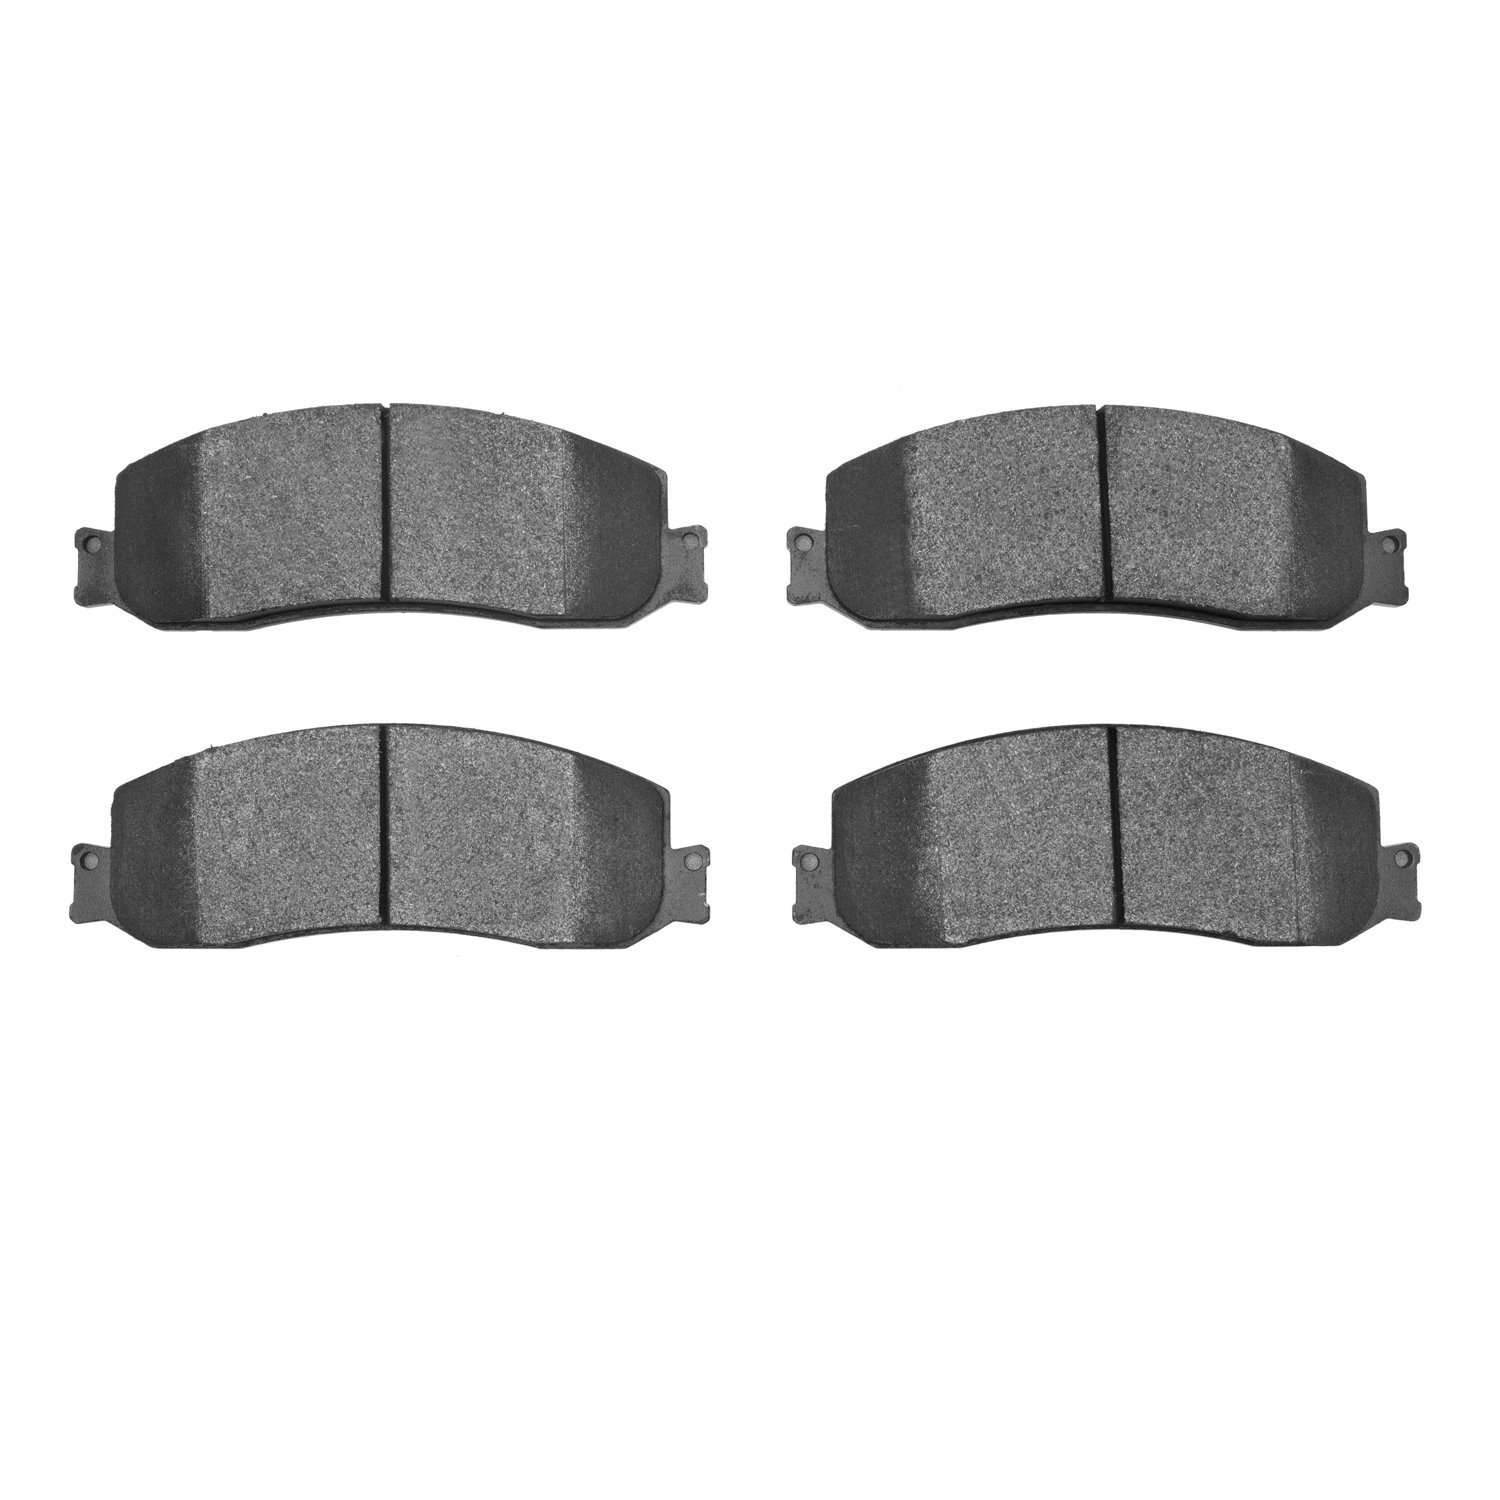 Super-Duty Brake Pads, 2010-2012 Ford/Lincoln/Mercury/Mazda, Position: Front